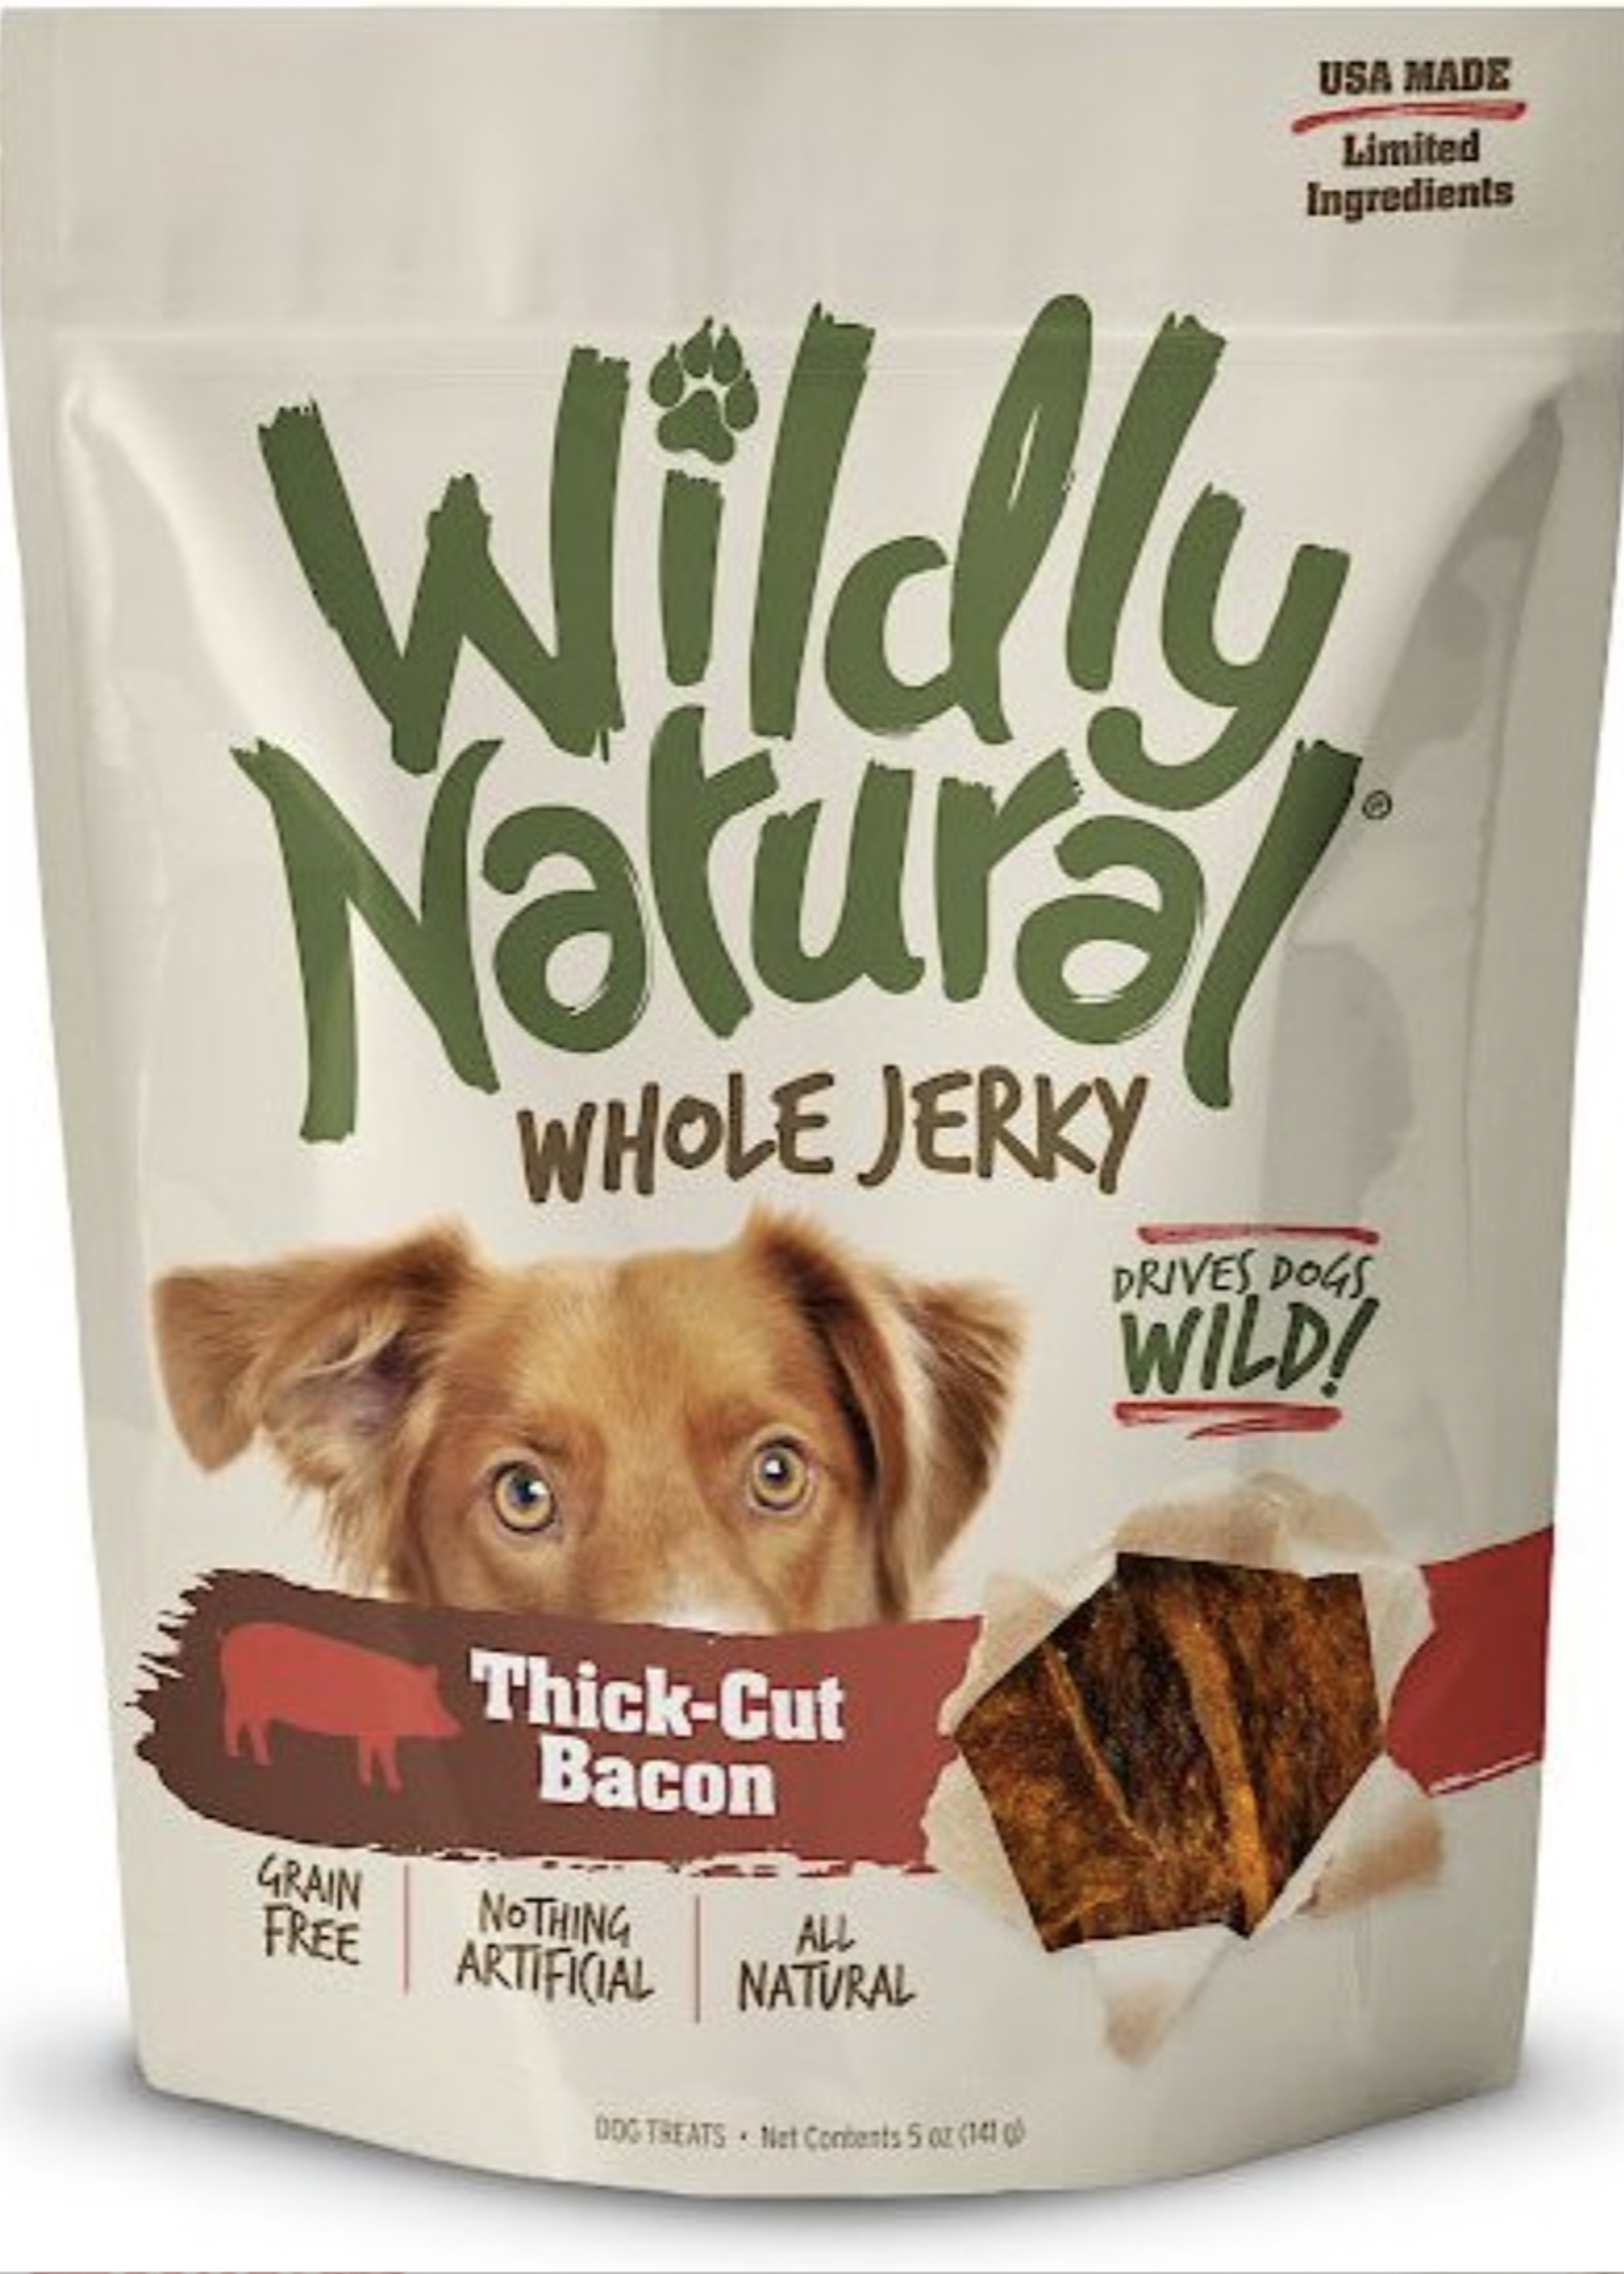 Wildly Natural Whole Jerky Tick Cut Bacon 12oz